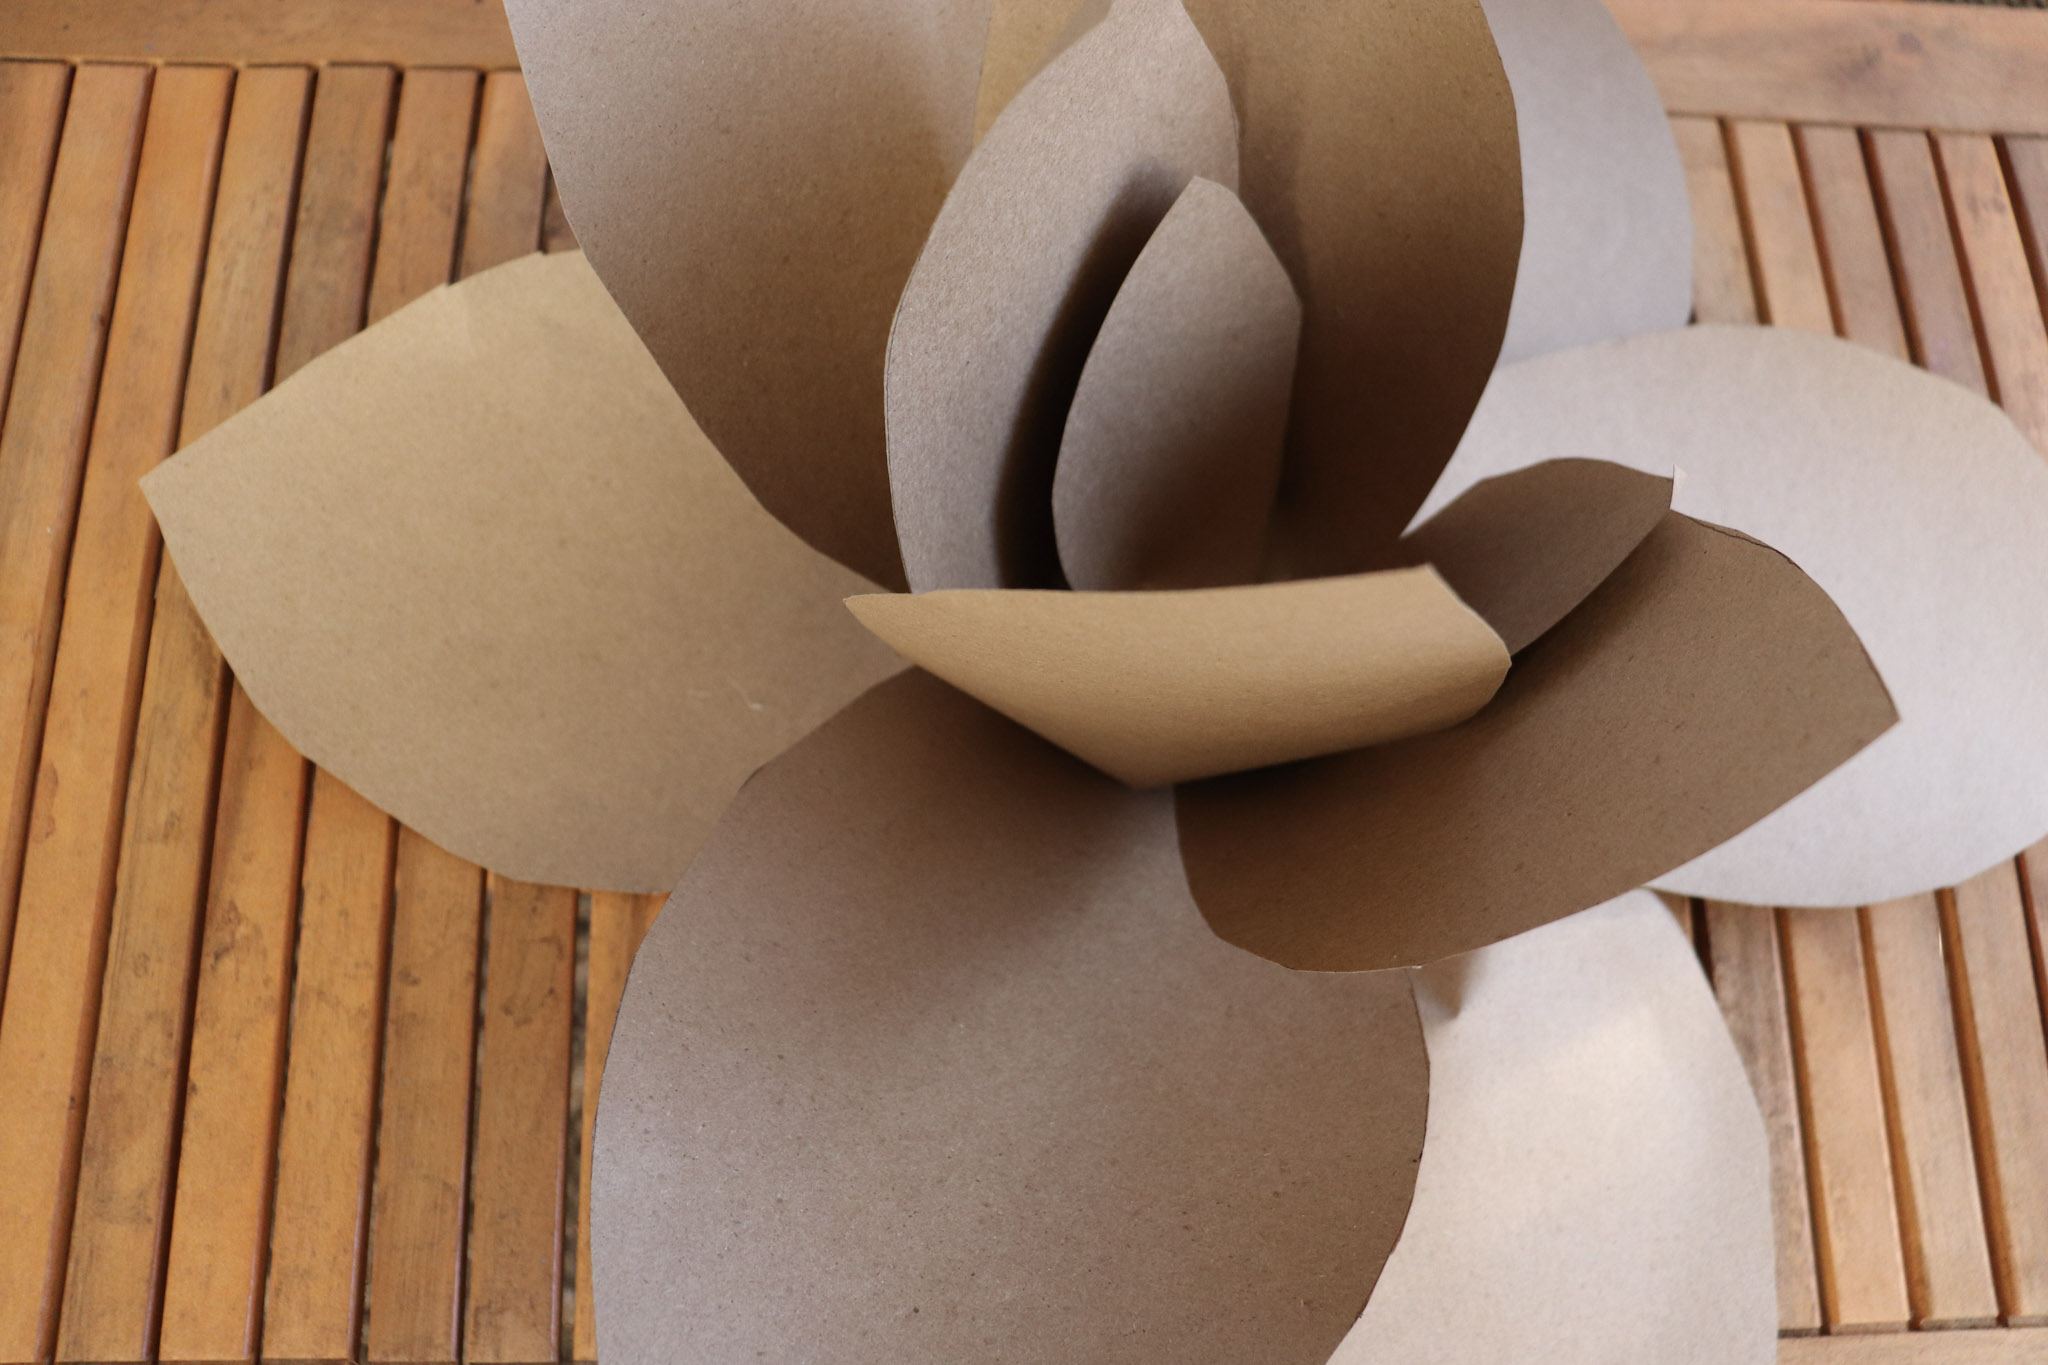 Flowers out of paper, How to make paper flowers, easy way to make large flowers out of paper, charlotte artist created florals out of paper, easy way to create flowers out of paper, Thanksgiving craft project